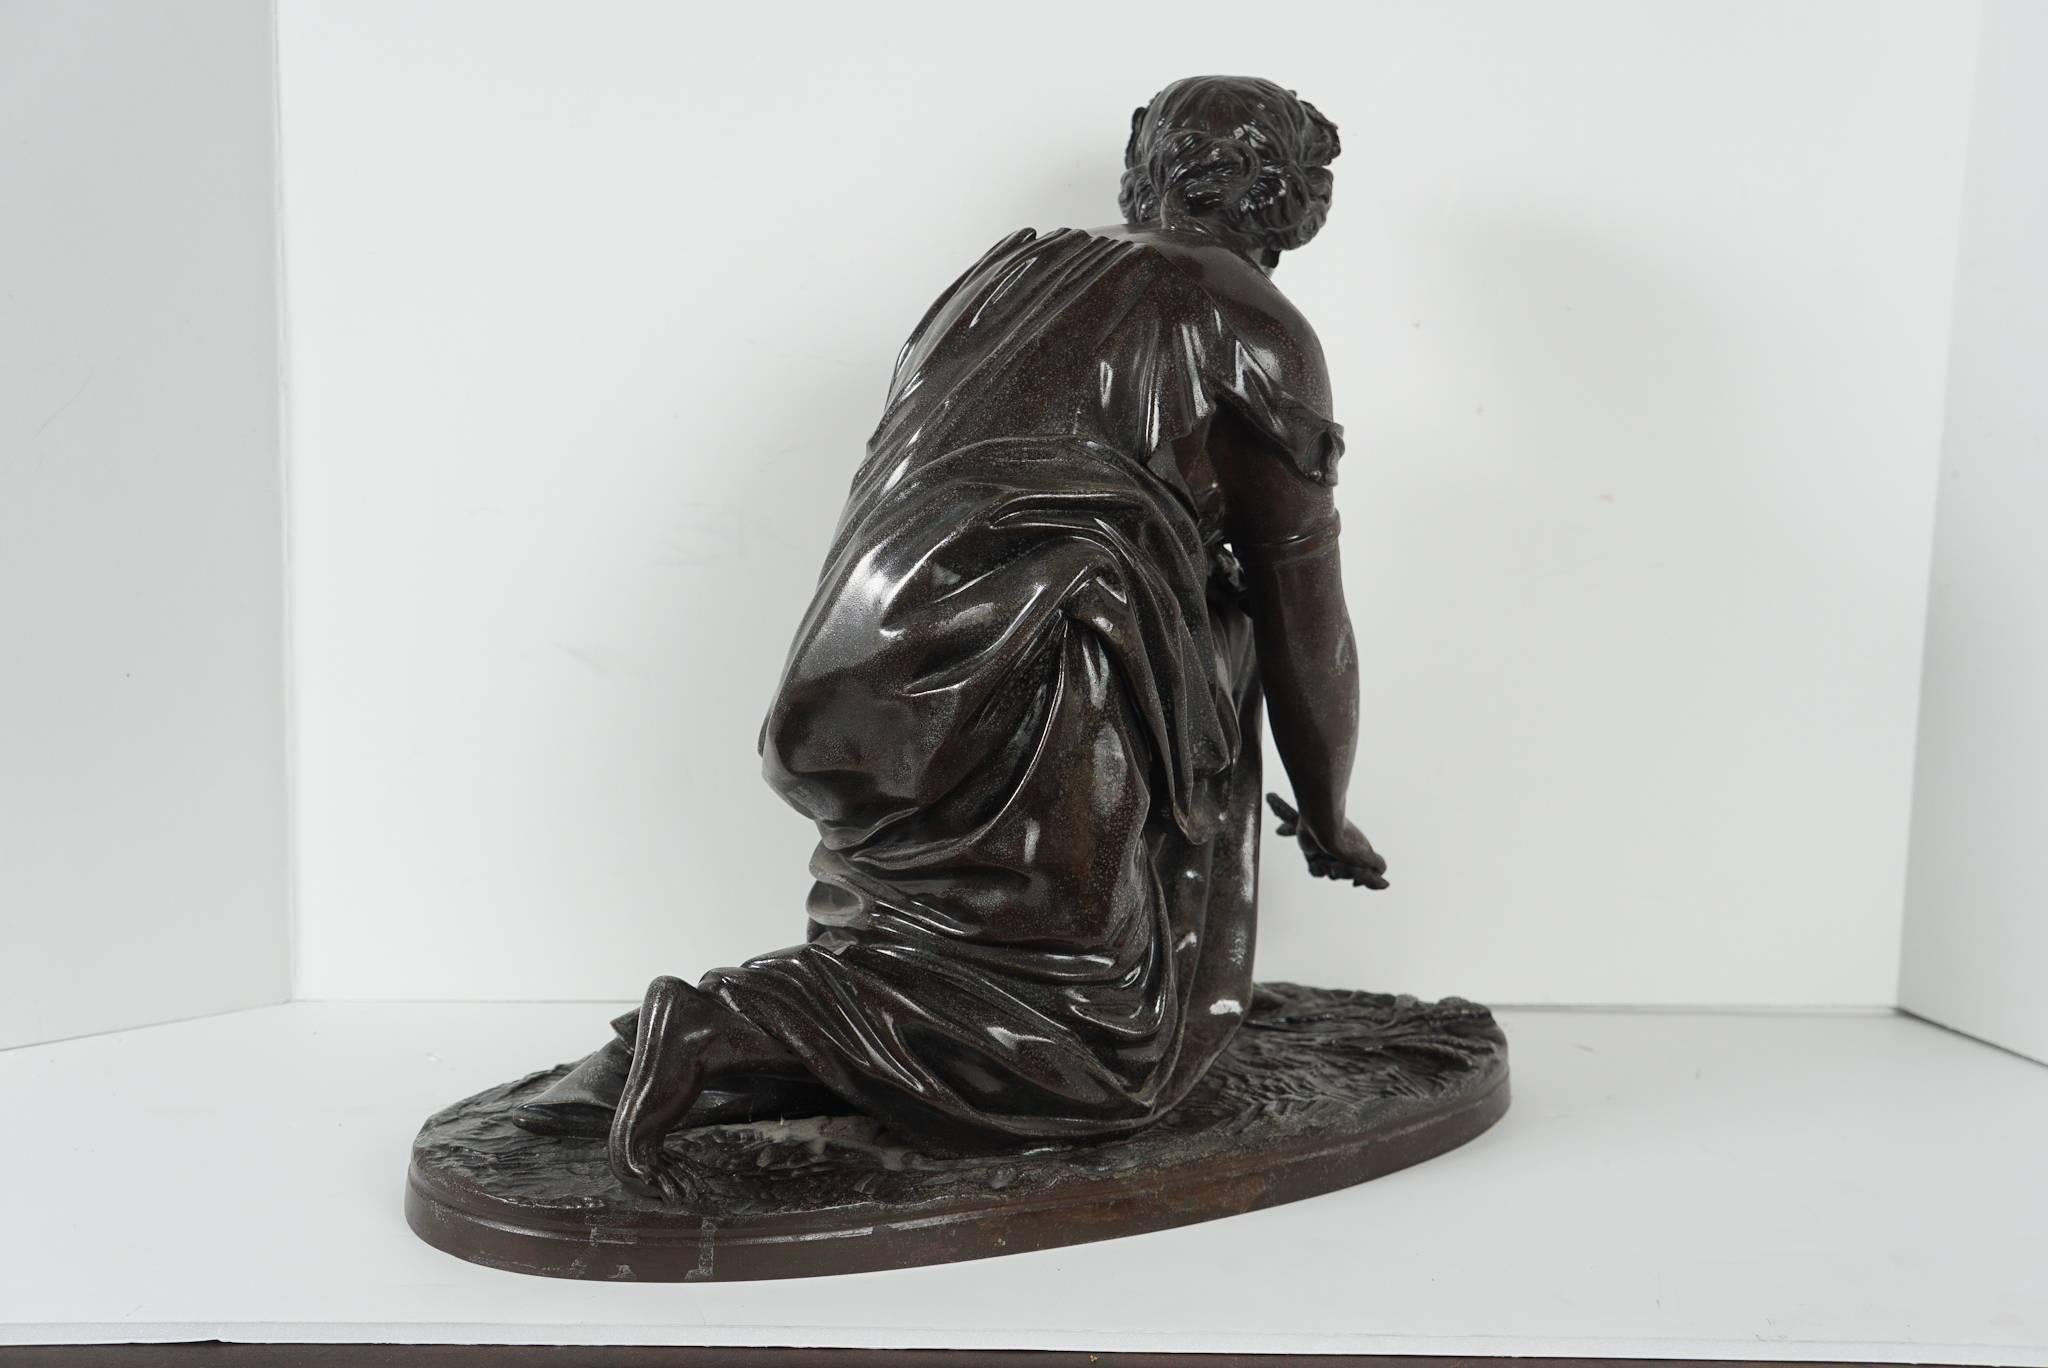 This sculpture from France follows a long artistic tradition in the country during the 19th century or fine bronze casting for the sculptural salons of the day. The state-sponsored exhibits created national pride and produced large bodies of work